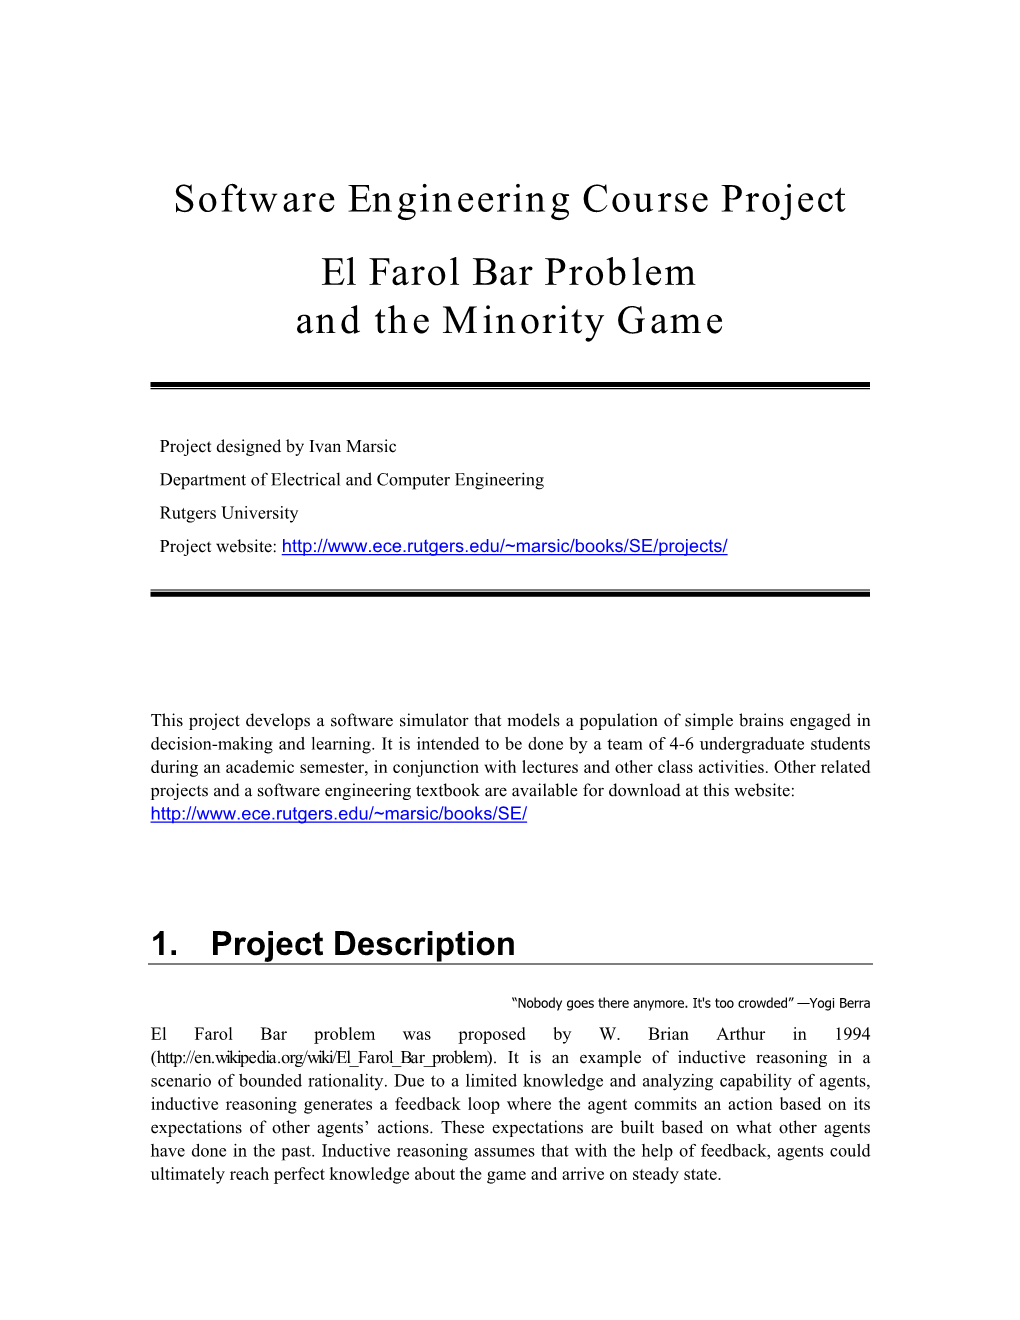 Software Engineering Course Project El Farol Bar Problem and the Minority Game